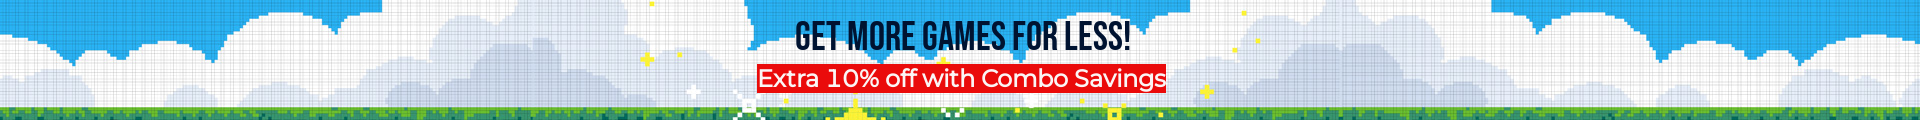 GET MORE GAMES FOR LESS